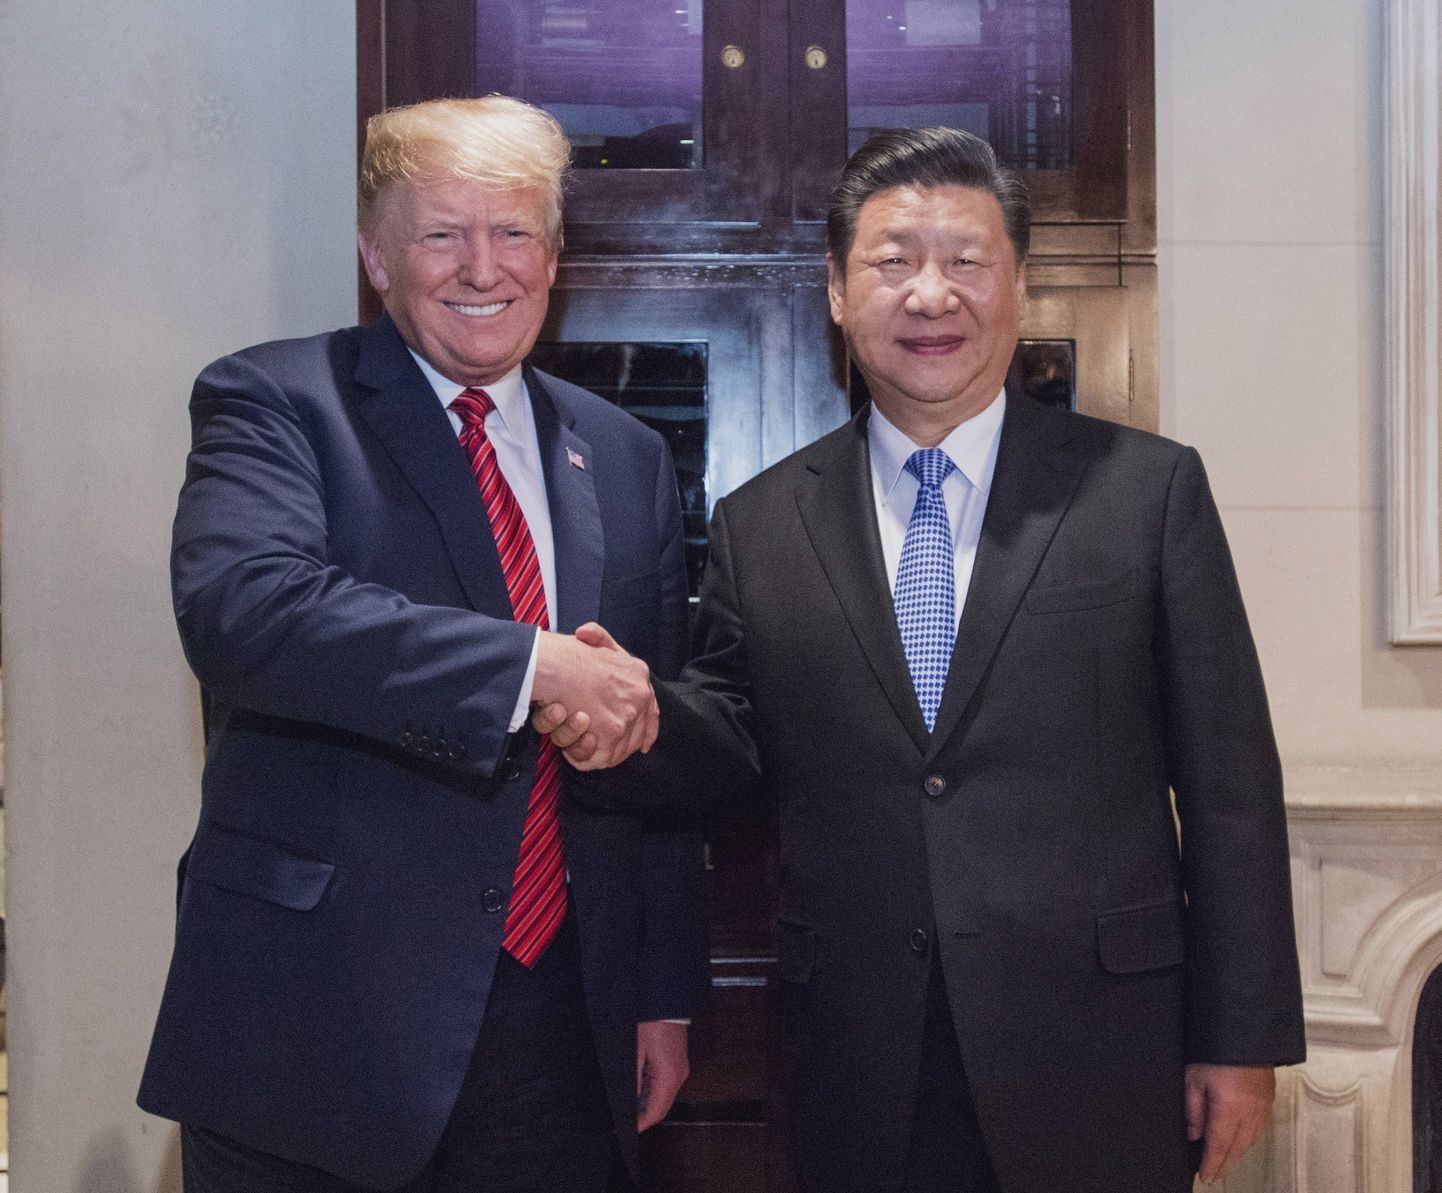 (181201) -- BUENOS AIRES, Dec. 1, 2018 -- Chinese President Xi Jinping (R) meets with his U.S. counterpart Donald Trump in Buenos Aires, Argentina, Dec. 1, 2018. President Xi attended a working dinner with President Trump in Buenos Aires on Saturday. ) (yy) ARGENTINA-BUENOS AIRES-XI JINPING-DONALD TRUMP-MEETING LixXueren PUBLICATIONxNOTxINxCHN